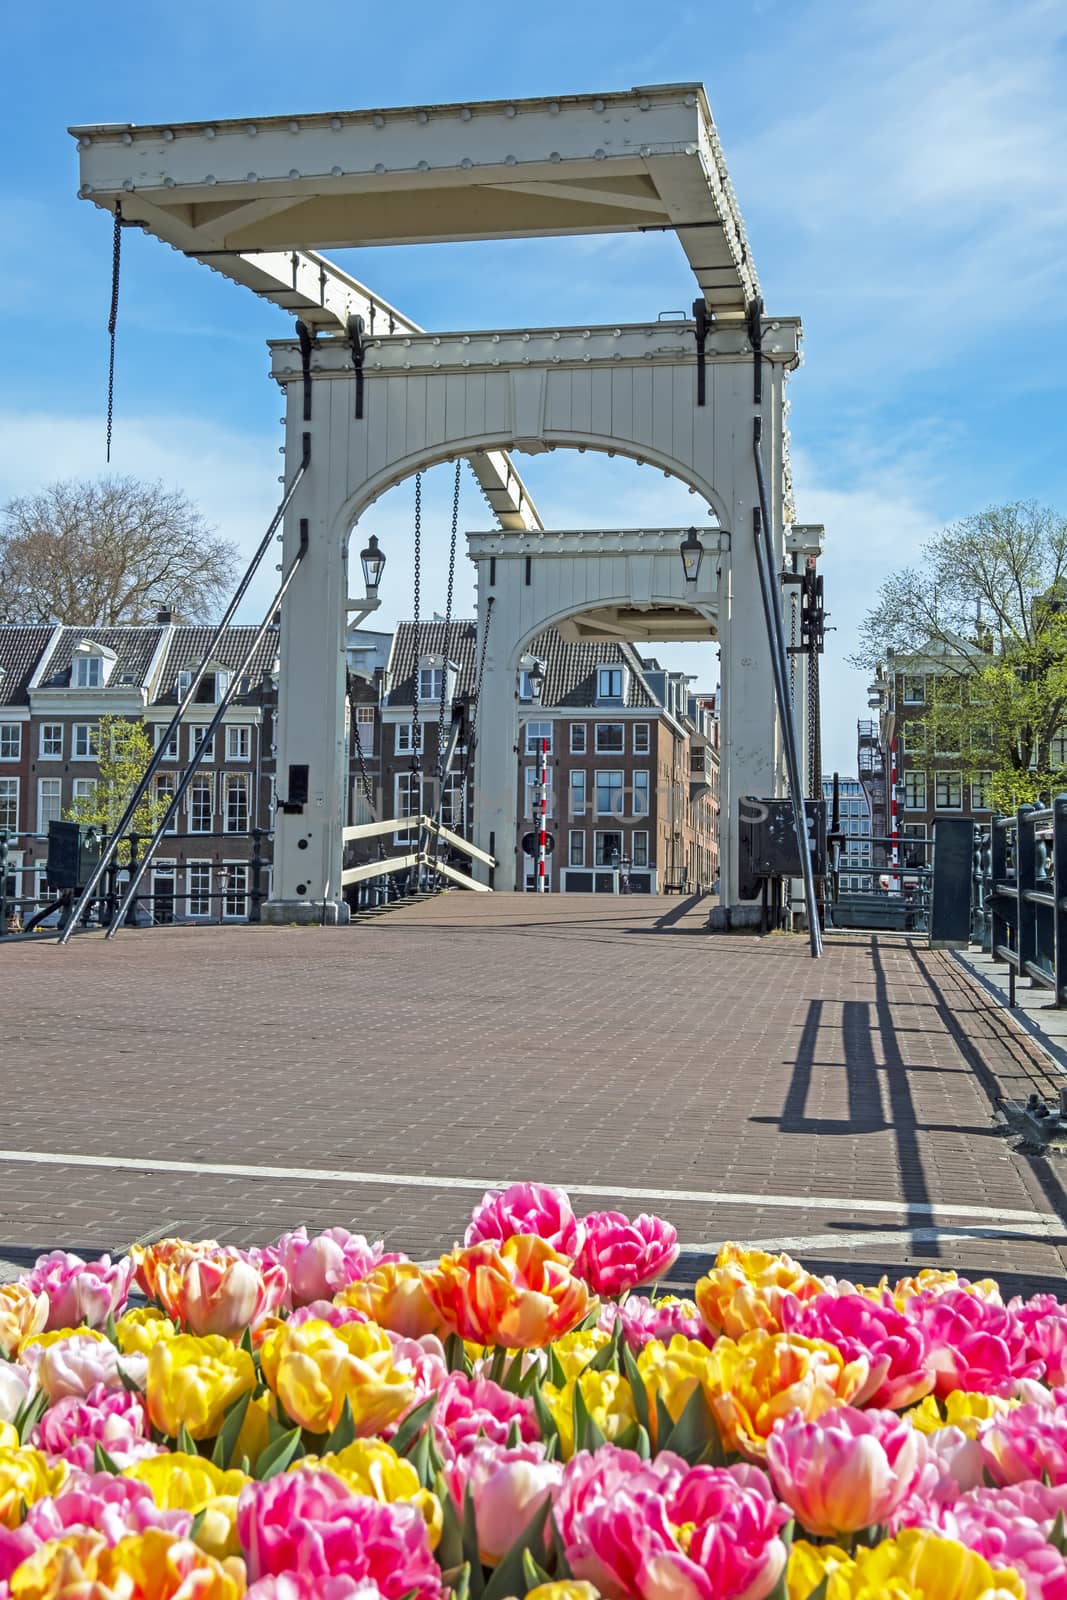 City scenic from Amsterdam in spring at the Tiny bridge in the Netherlands